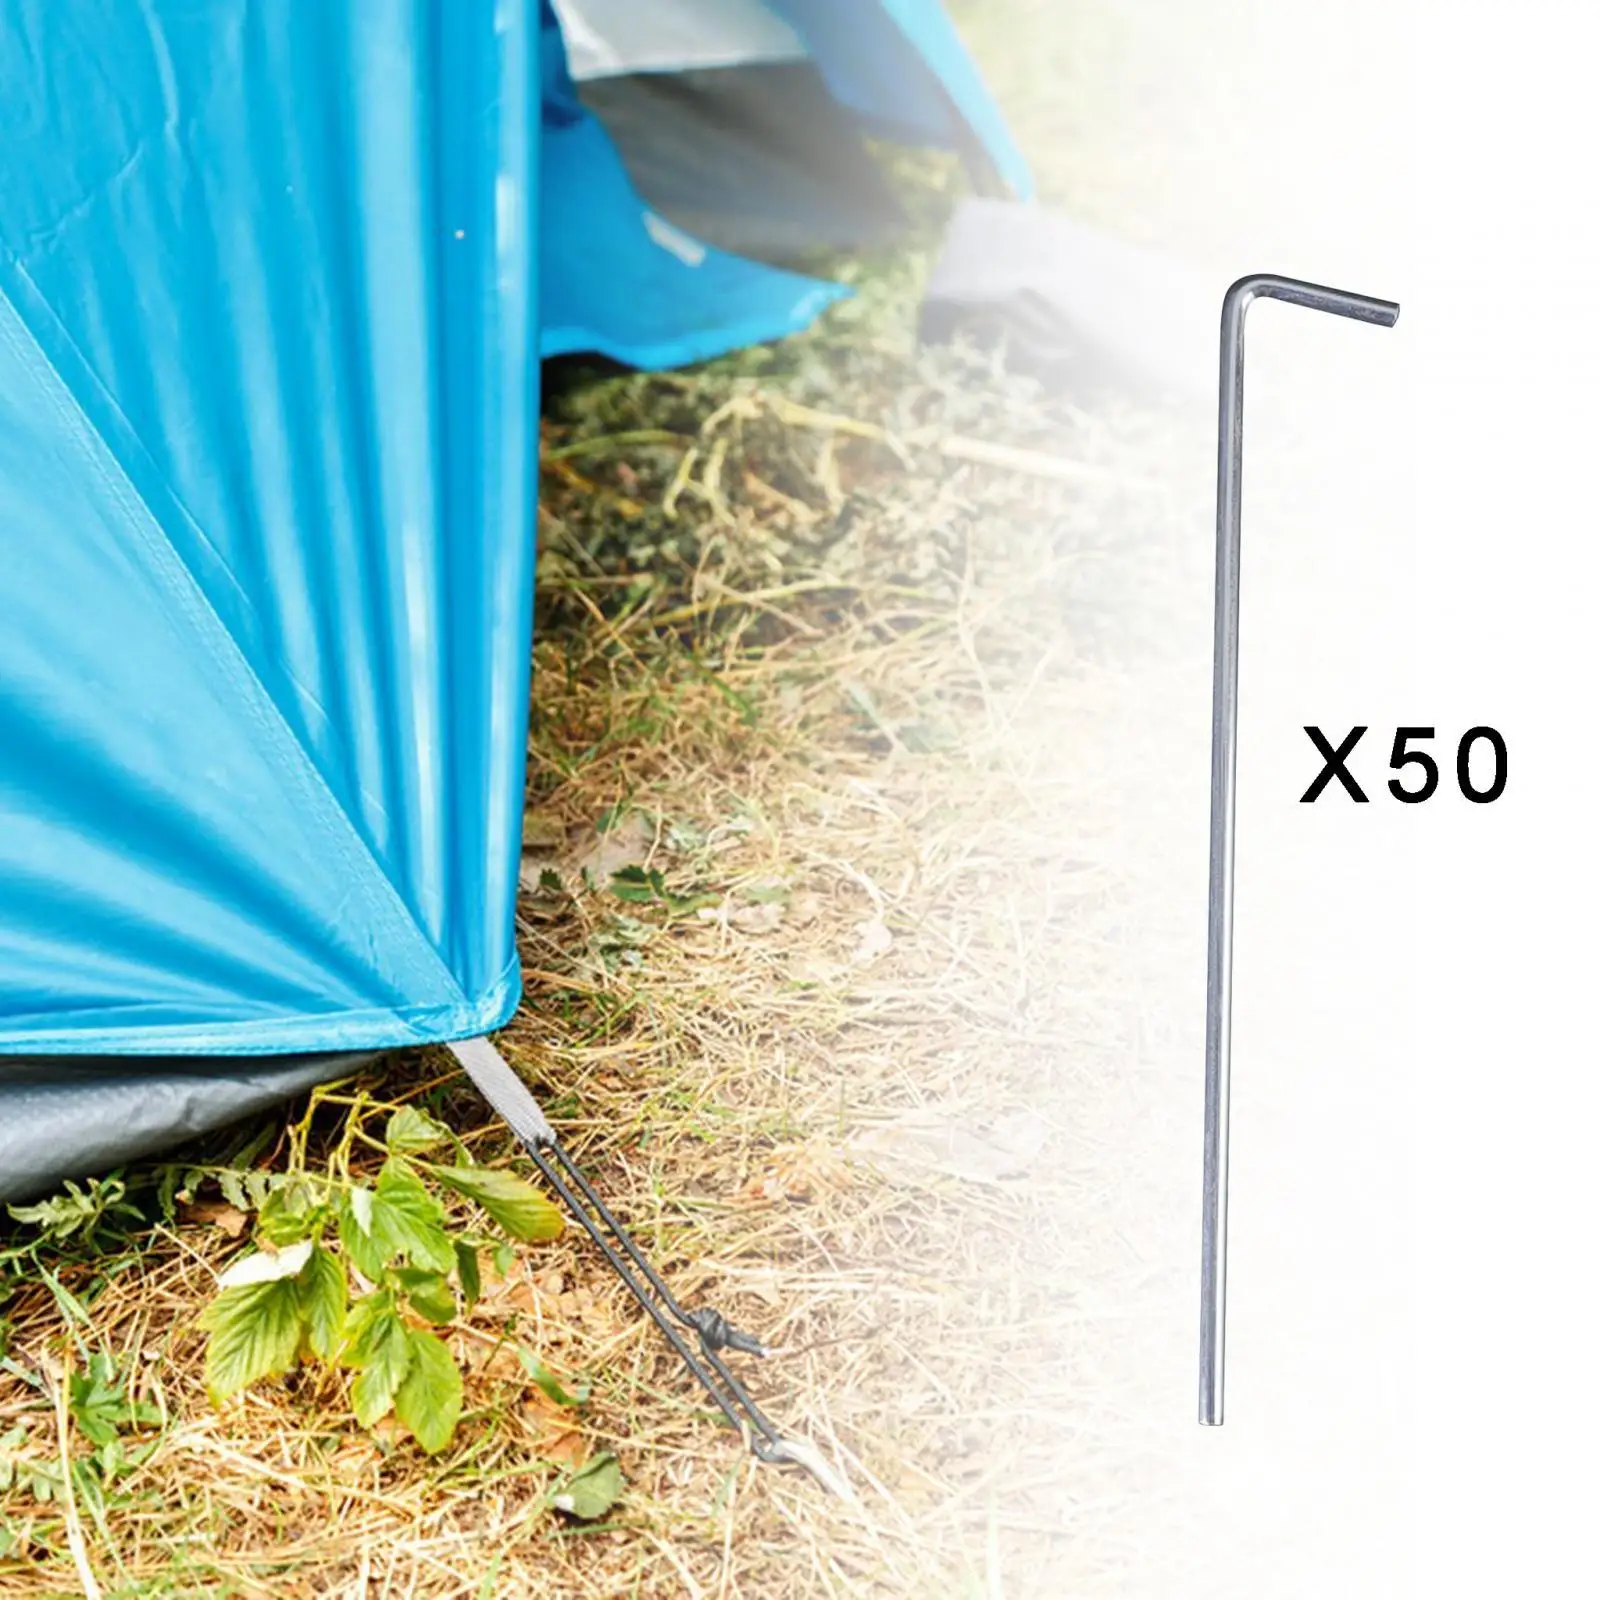 

50 Pieces Tent Pegs 200mm Tent Nails Aluminum Alloy for Camping Awning, Netting Tarpaulin Rust Proof Ground Spikes Multipurpose